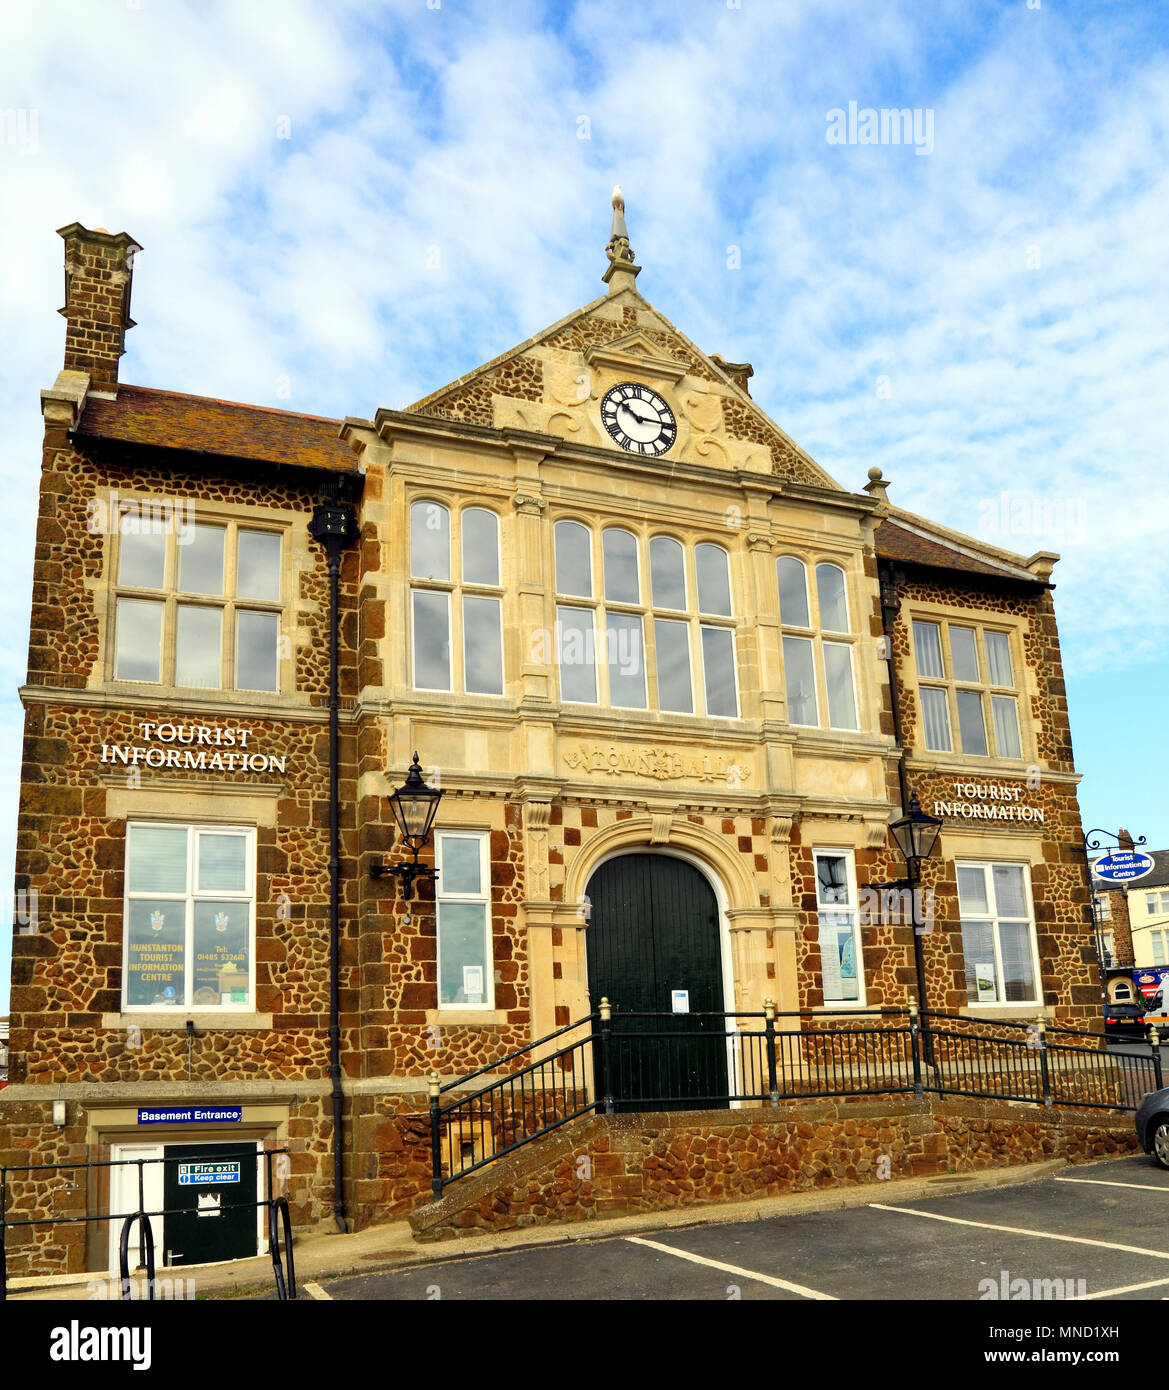 Hunstanton, Norfolk, Old Town Hall, Tourist Information Centre, England, UK, carstone, building, Victorian, architecture Stock Photo